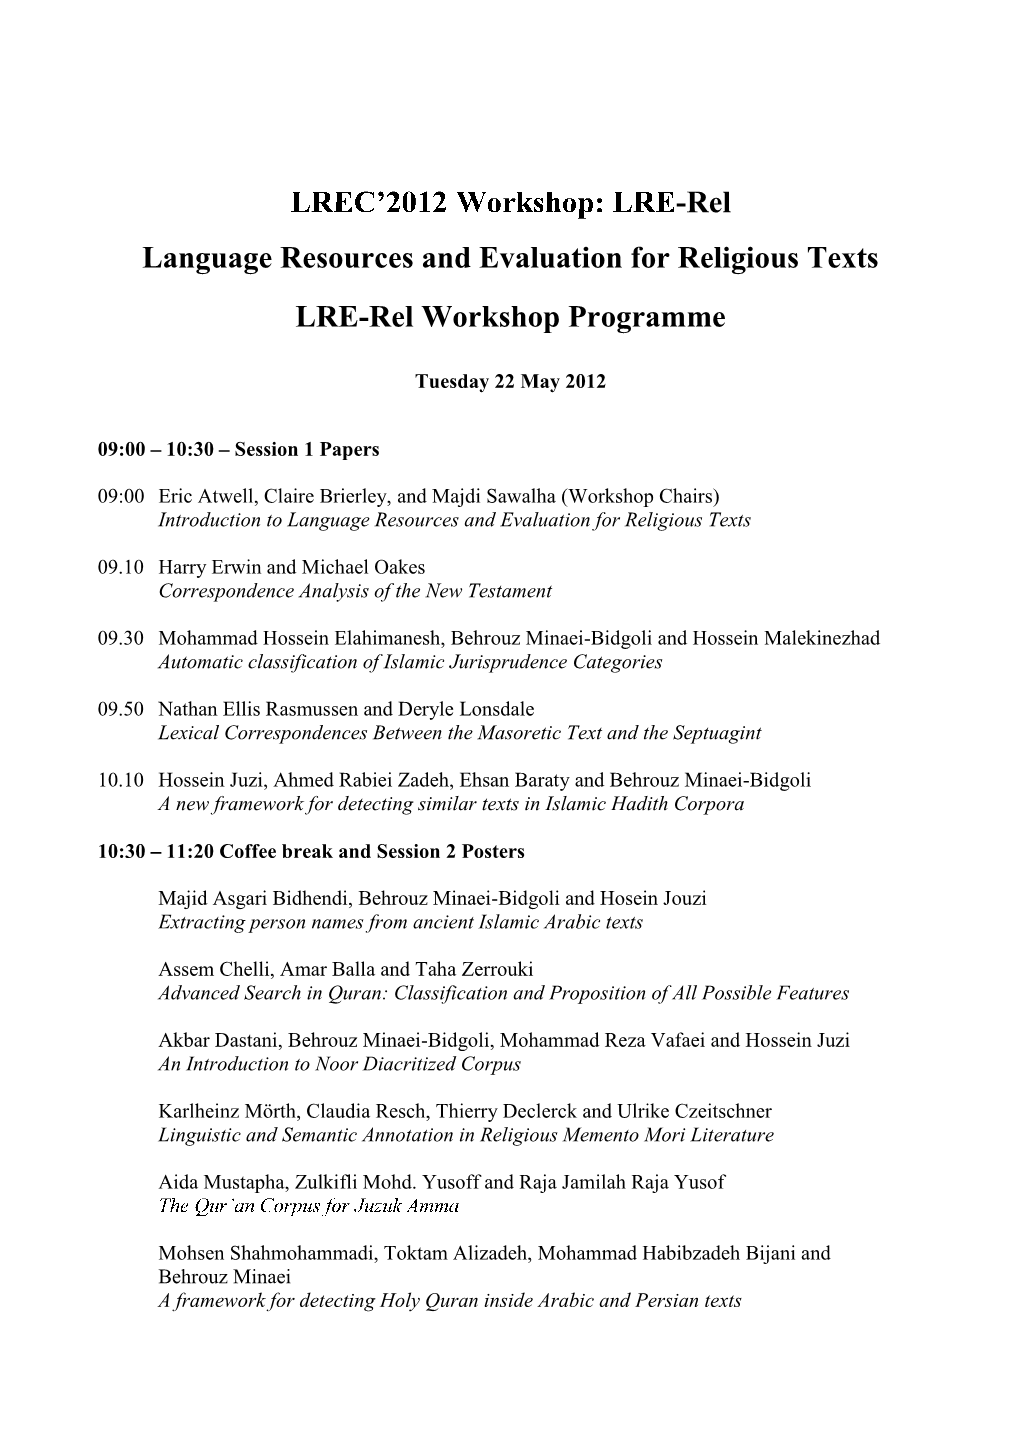 LRE-Rel Language Resources and Evaluation for Religious Texts